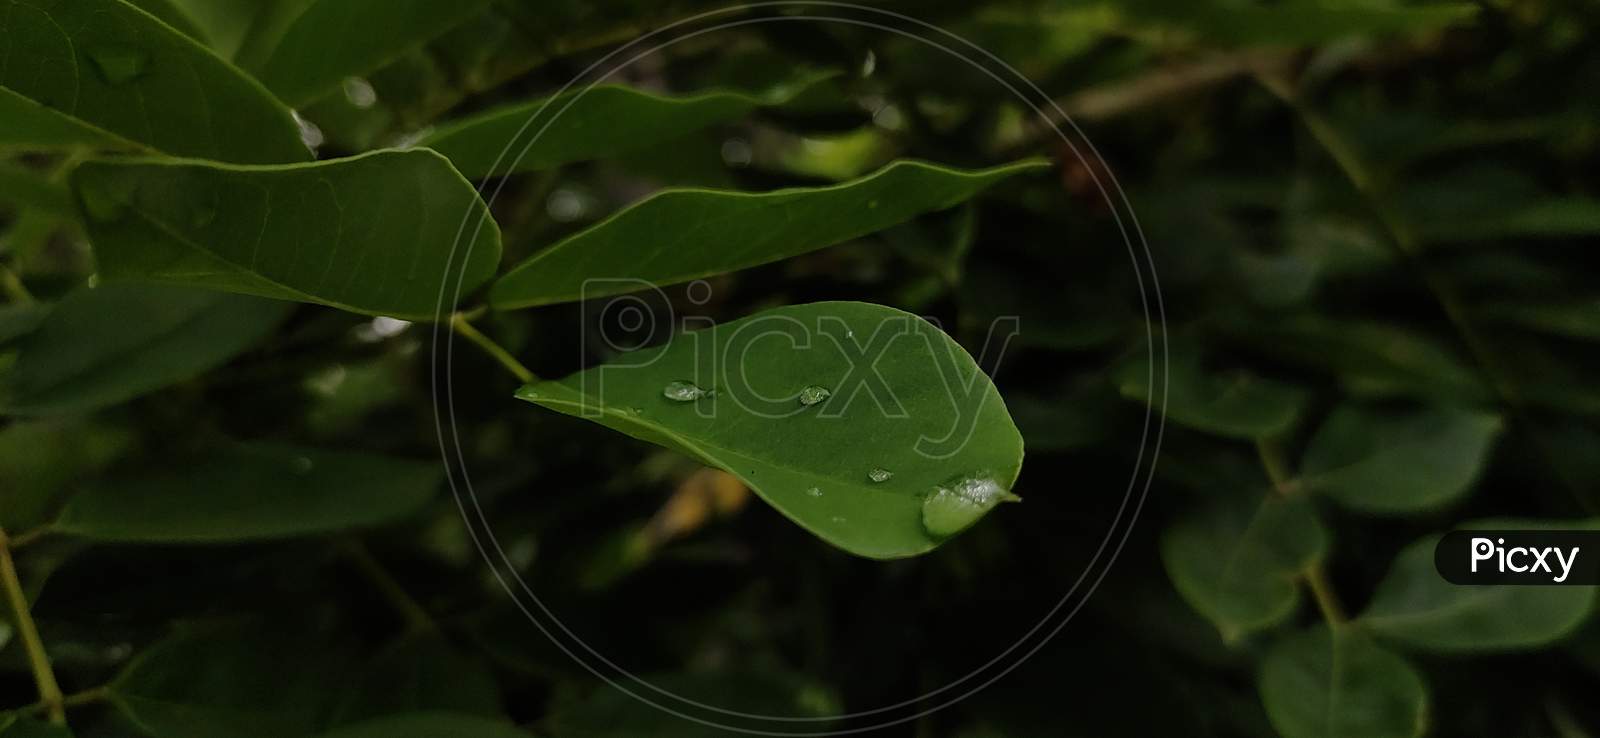 Water droplets on a leaf reflect the sunlight.